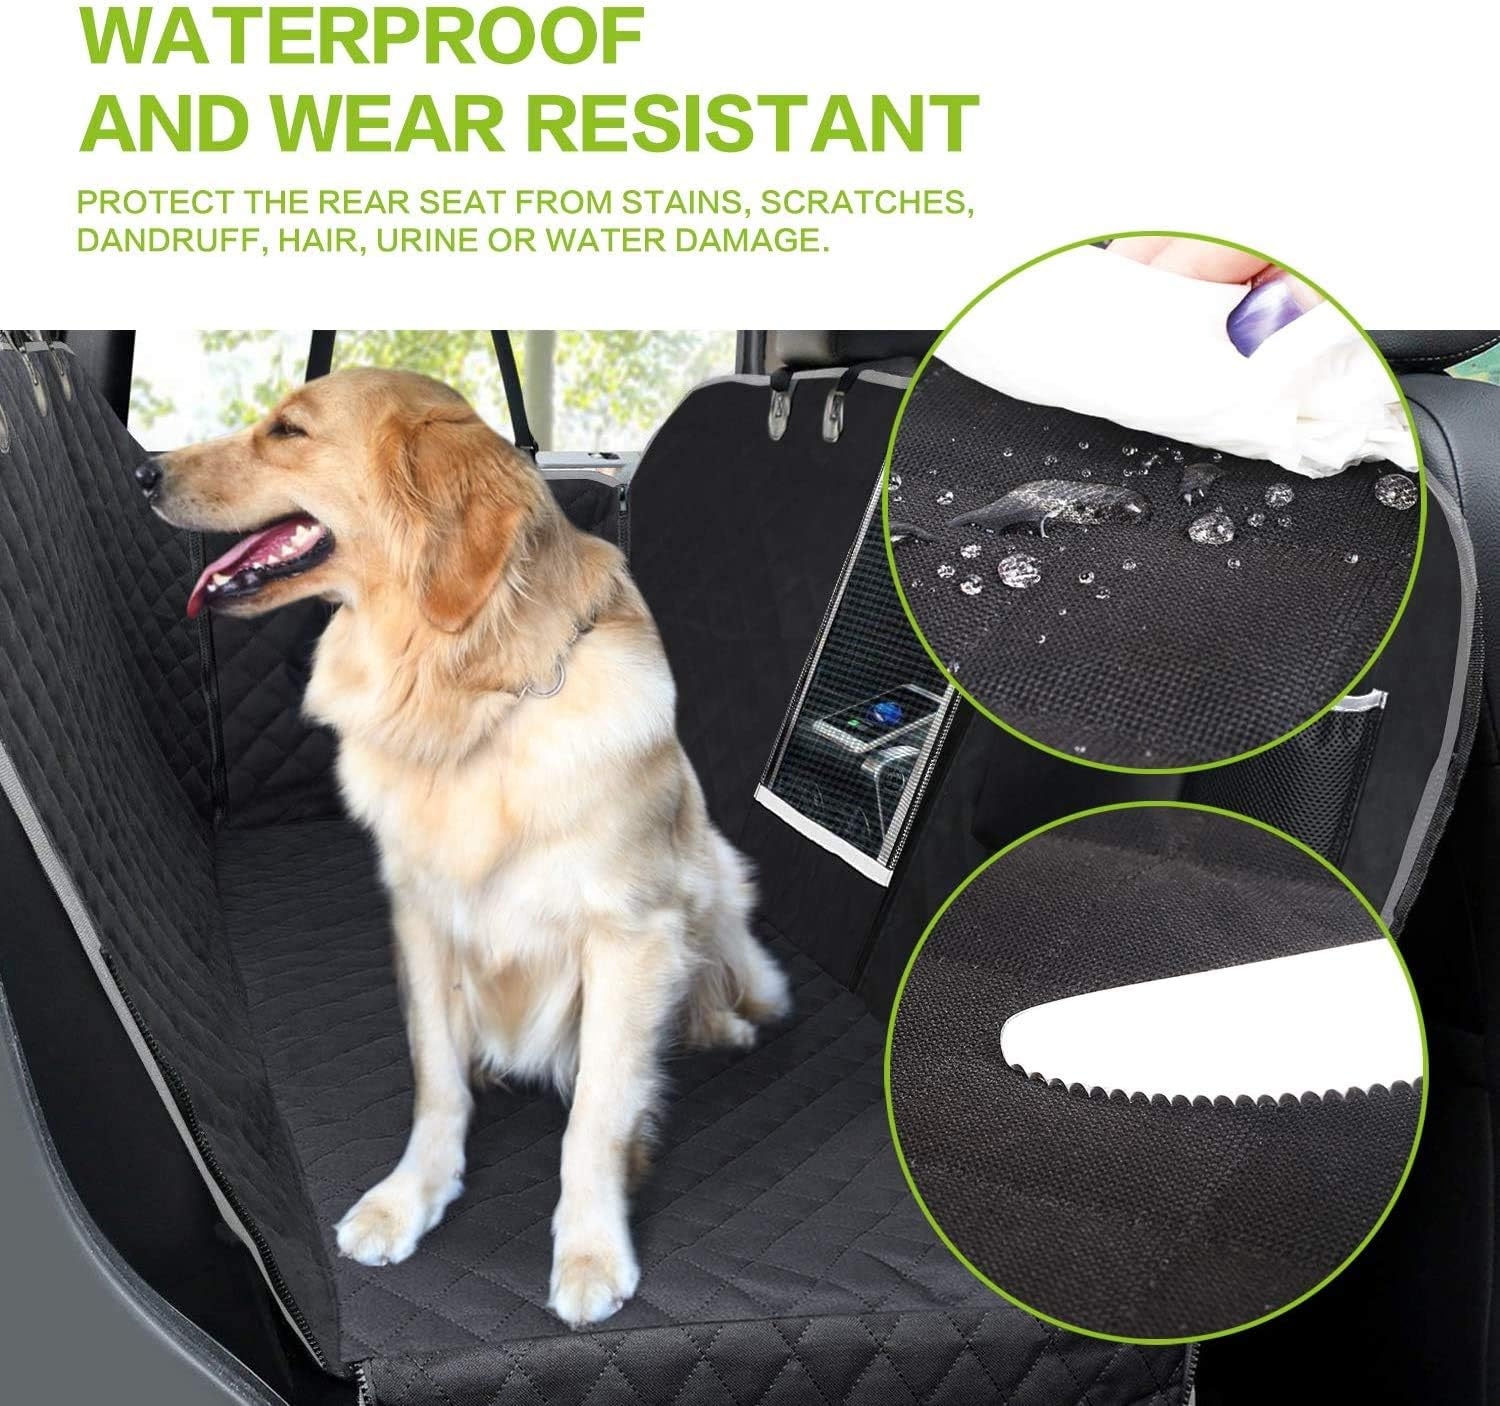 Pecute Dog Seat Cover 100% Waterproof Car Seat Covers for Pets Back Seat Cover with Mesh Window, Scratch Proof Non Slip Dog Car Hammock, Dog Backseat Cover for Cars Trucks SUV